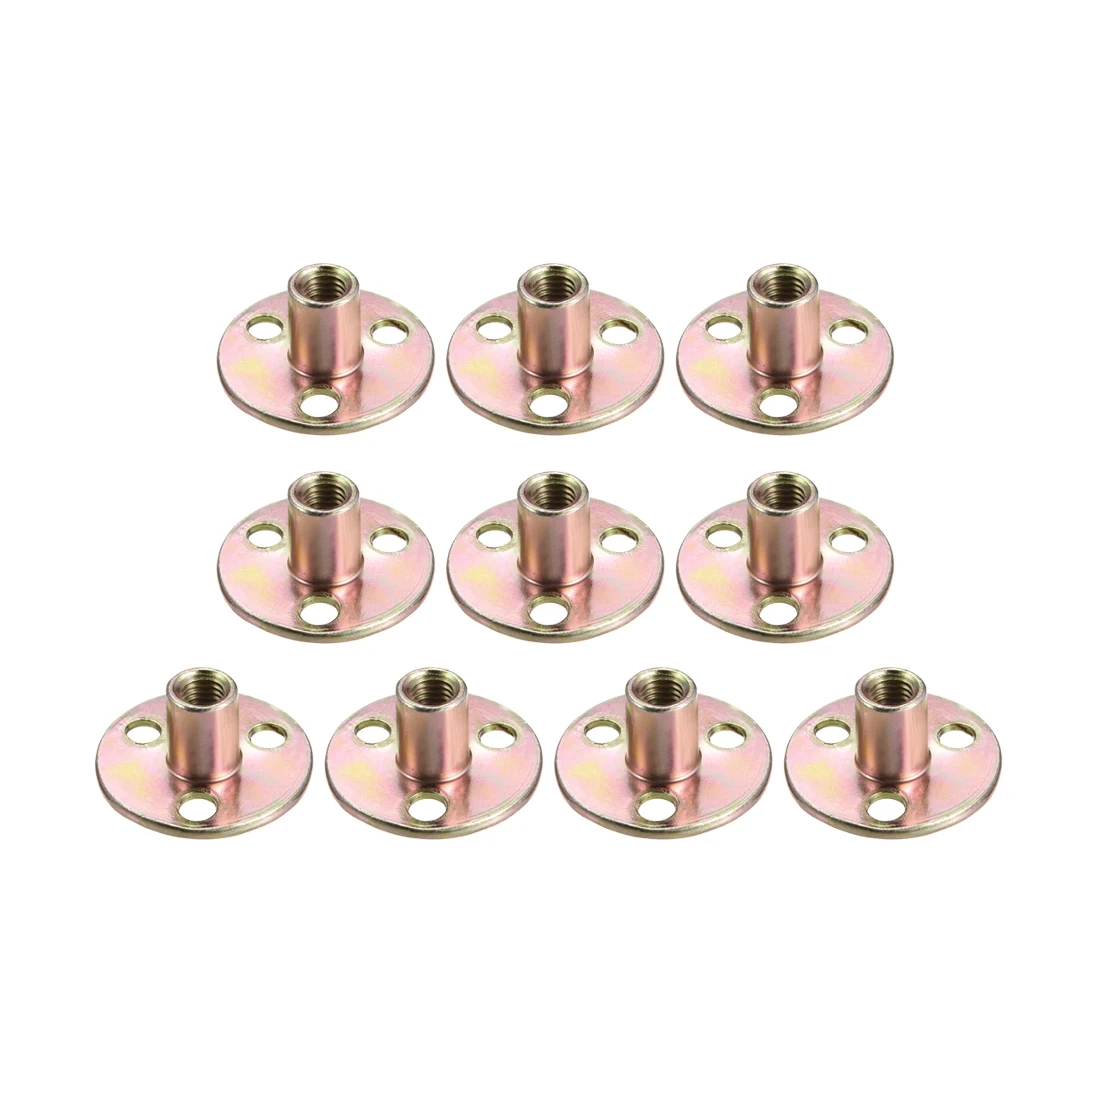 10-Piece Set M6M8M10 Iron Plate Nut with Round Base Carbon Steel T-Nuts 